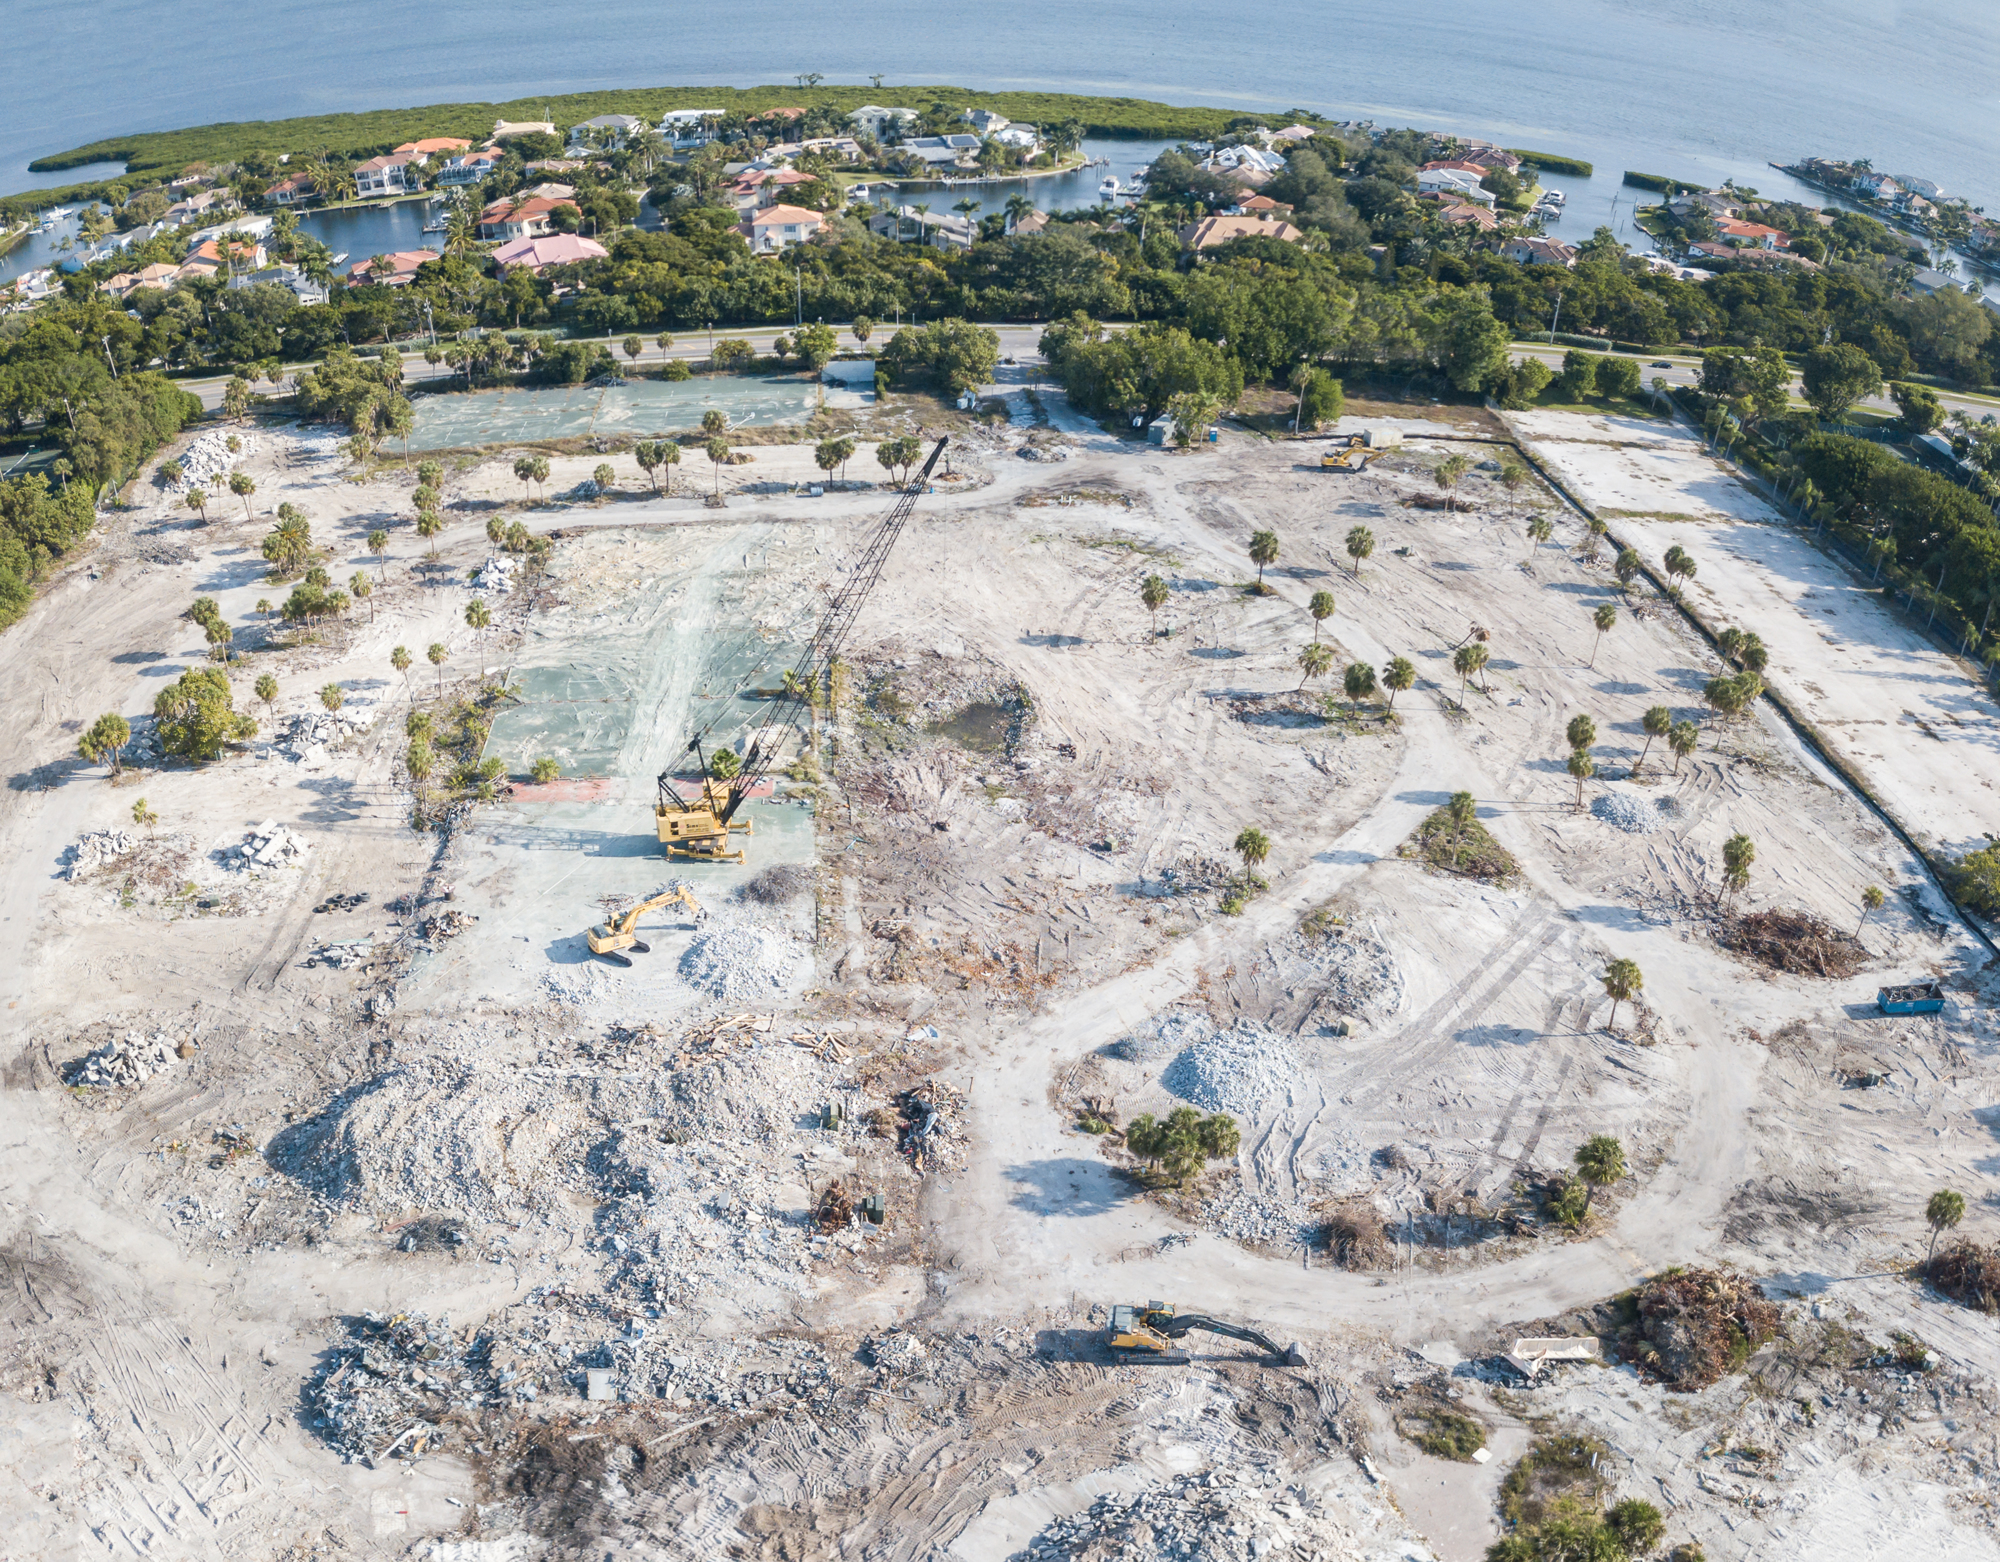 Early 2019: Following the late 2018 demolition of the Colony Beach & Tennis Resort's mid-rise building, the 17.6 acres stood empty for about three years. (File photo)